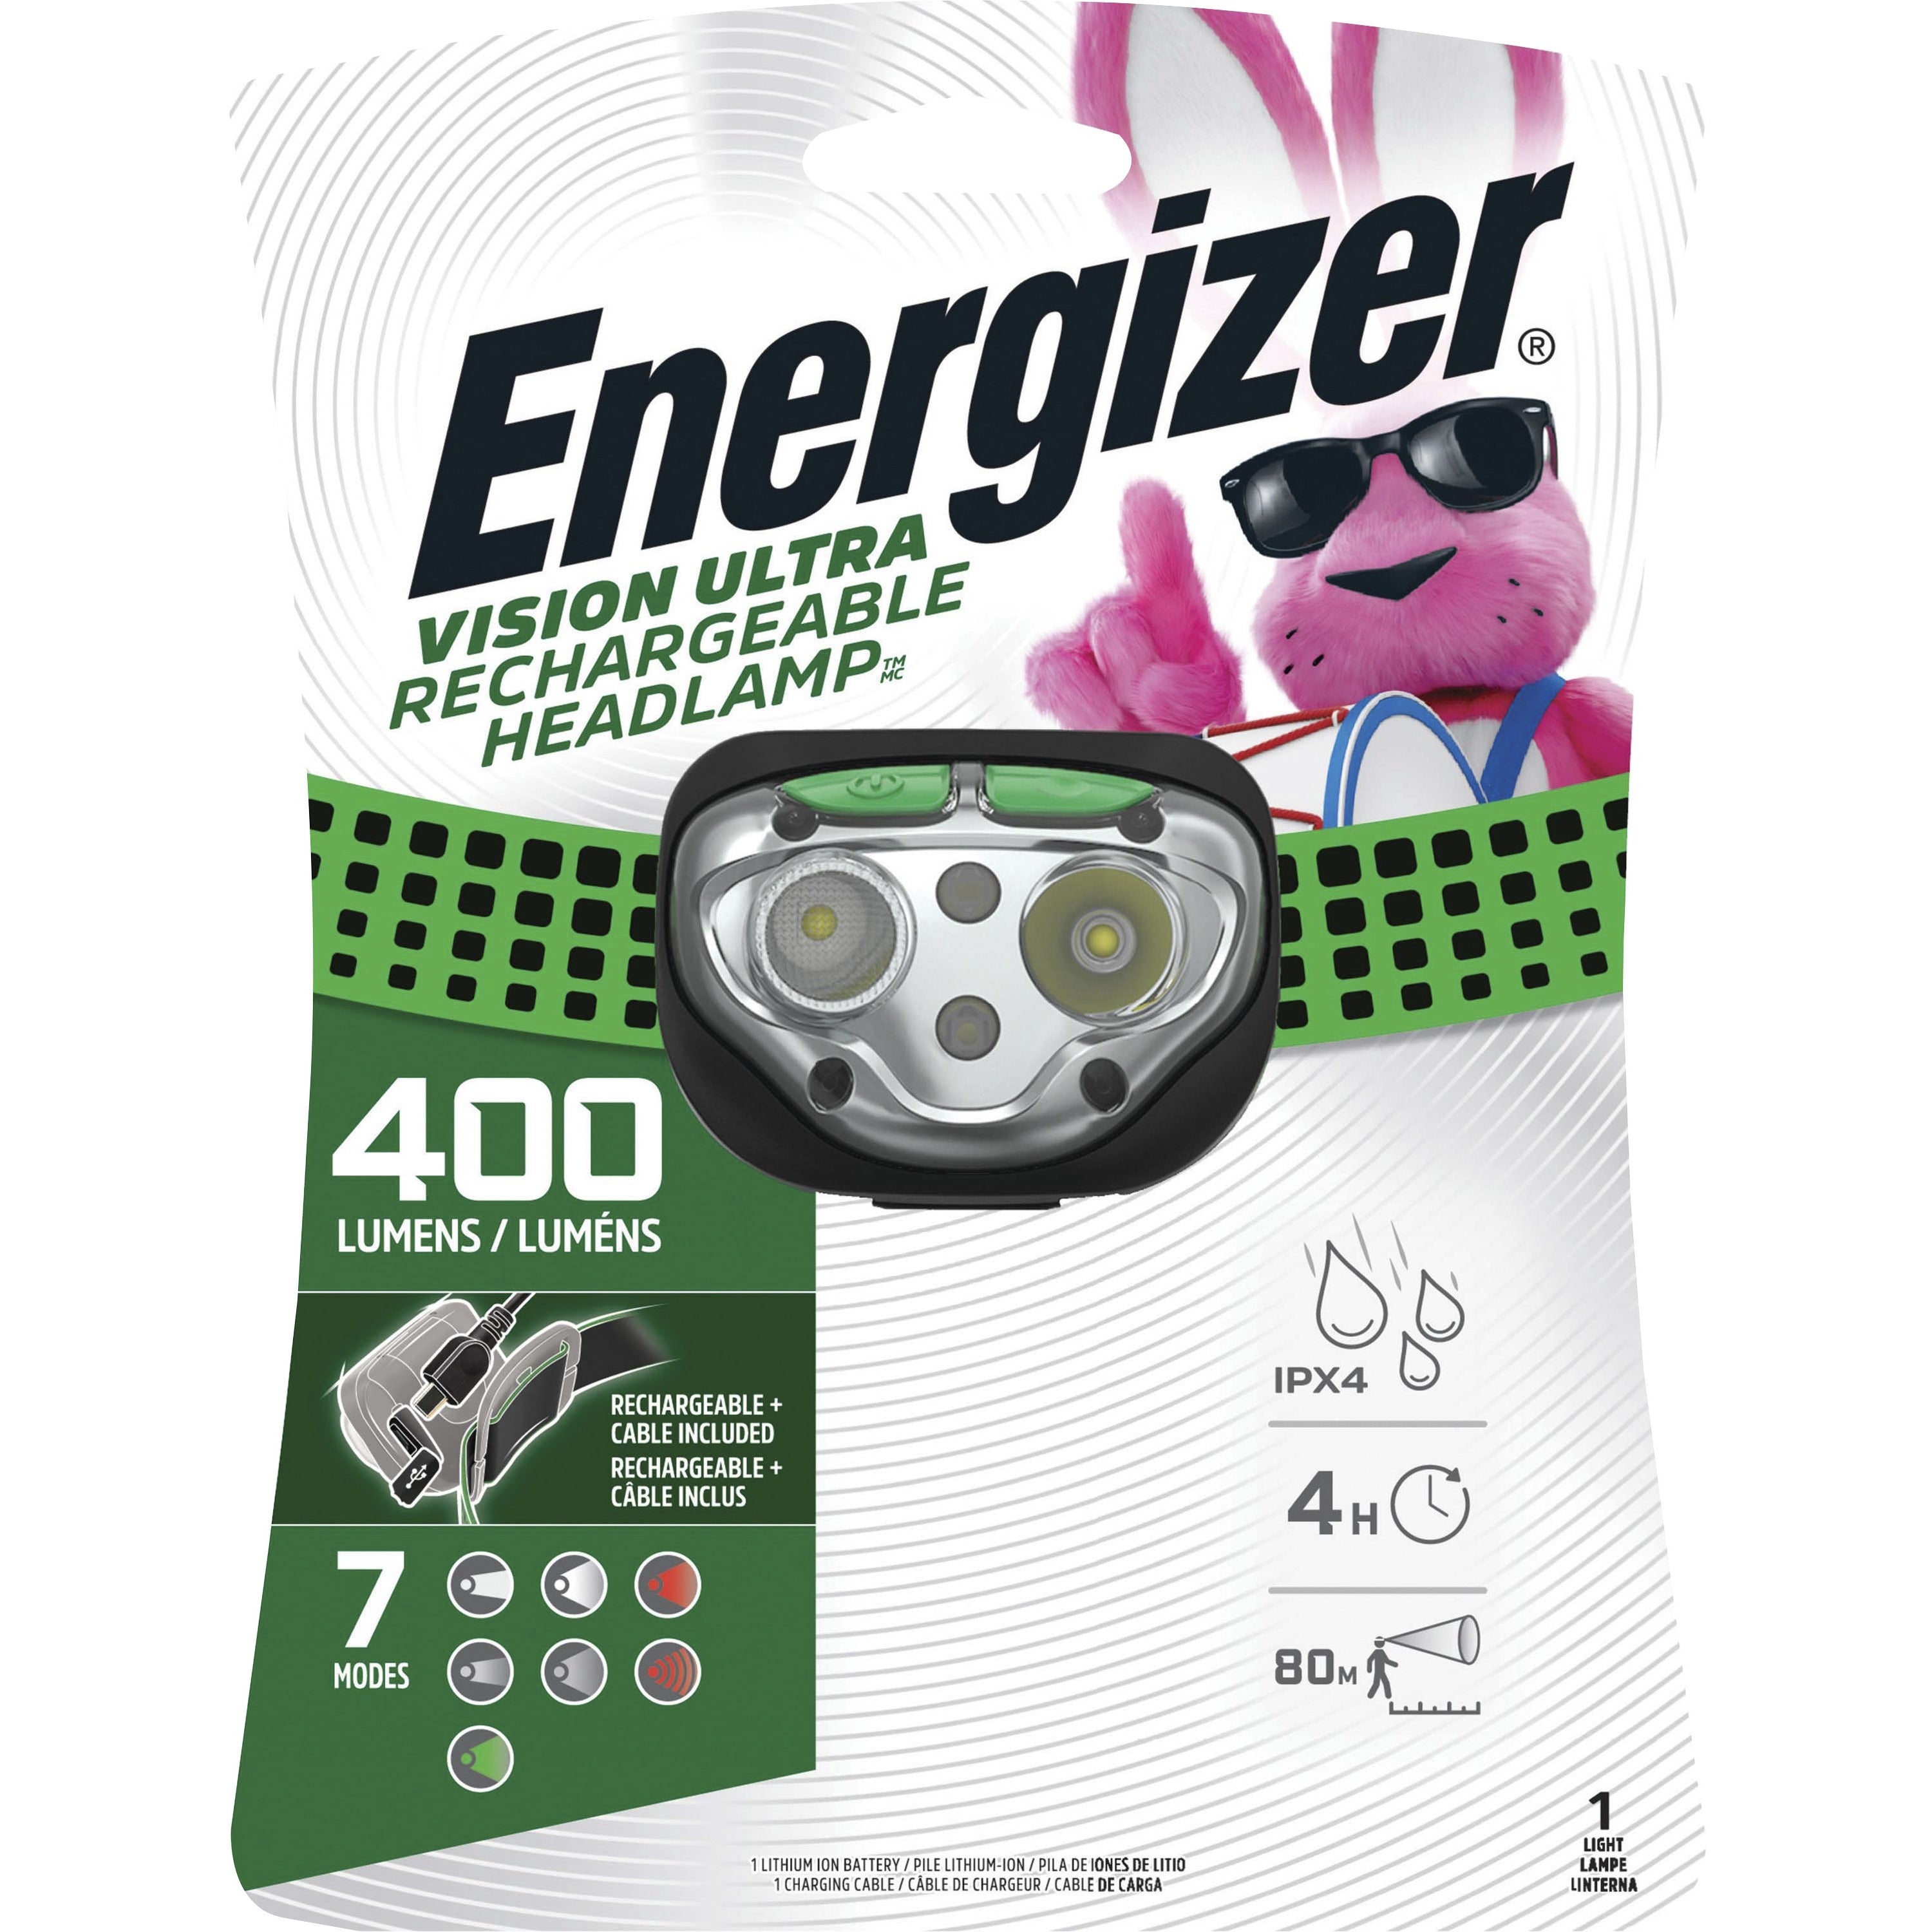 energizer-vision-ultra-hd-rechargeable-headlamp-includes-usb-charging-cable-led-400-lm-lumen-battery-rechargeable-battery-usb-water-resistant-drop-resistant-green_eveenhdfrlp - 1